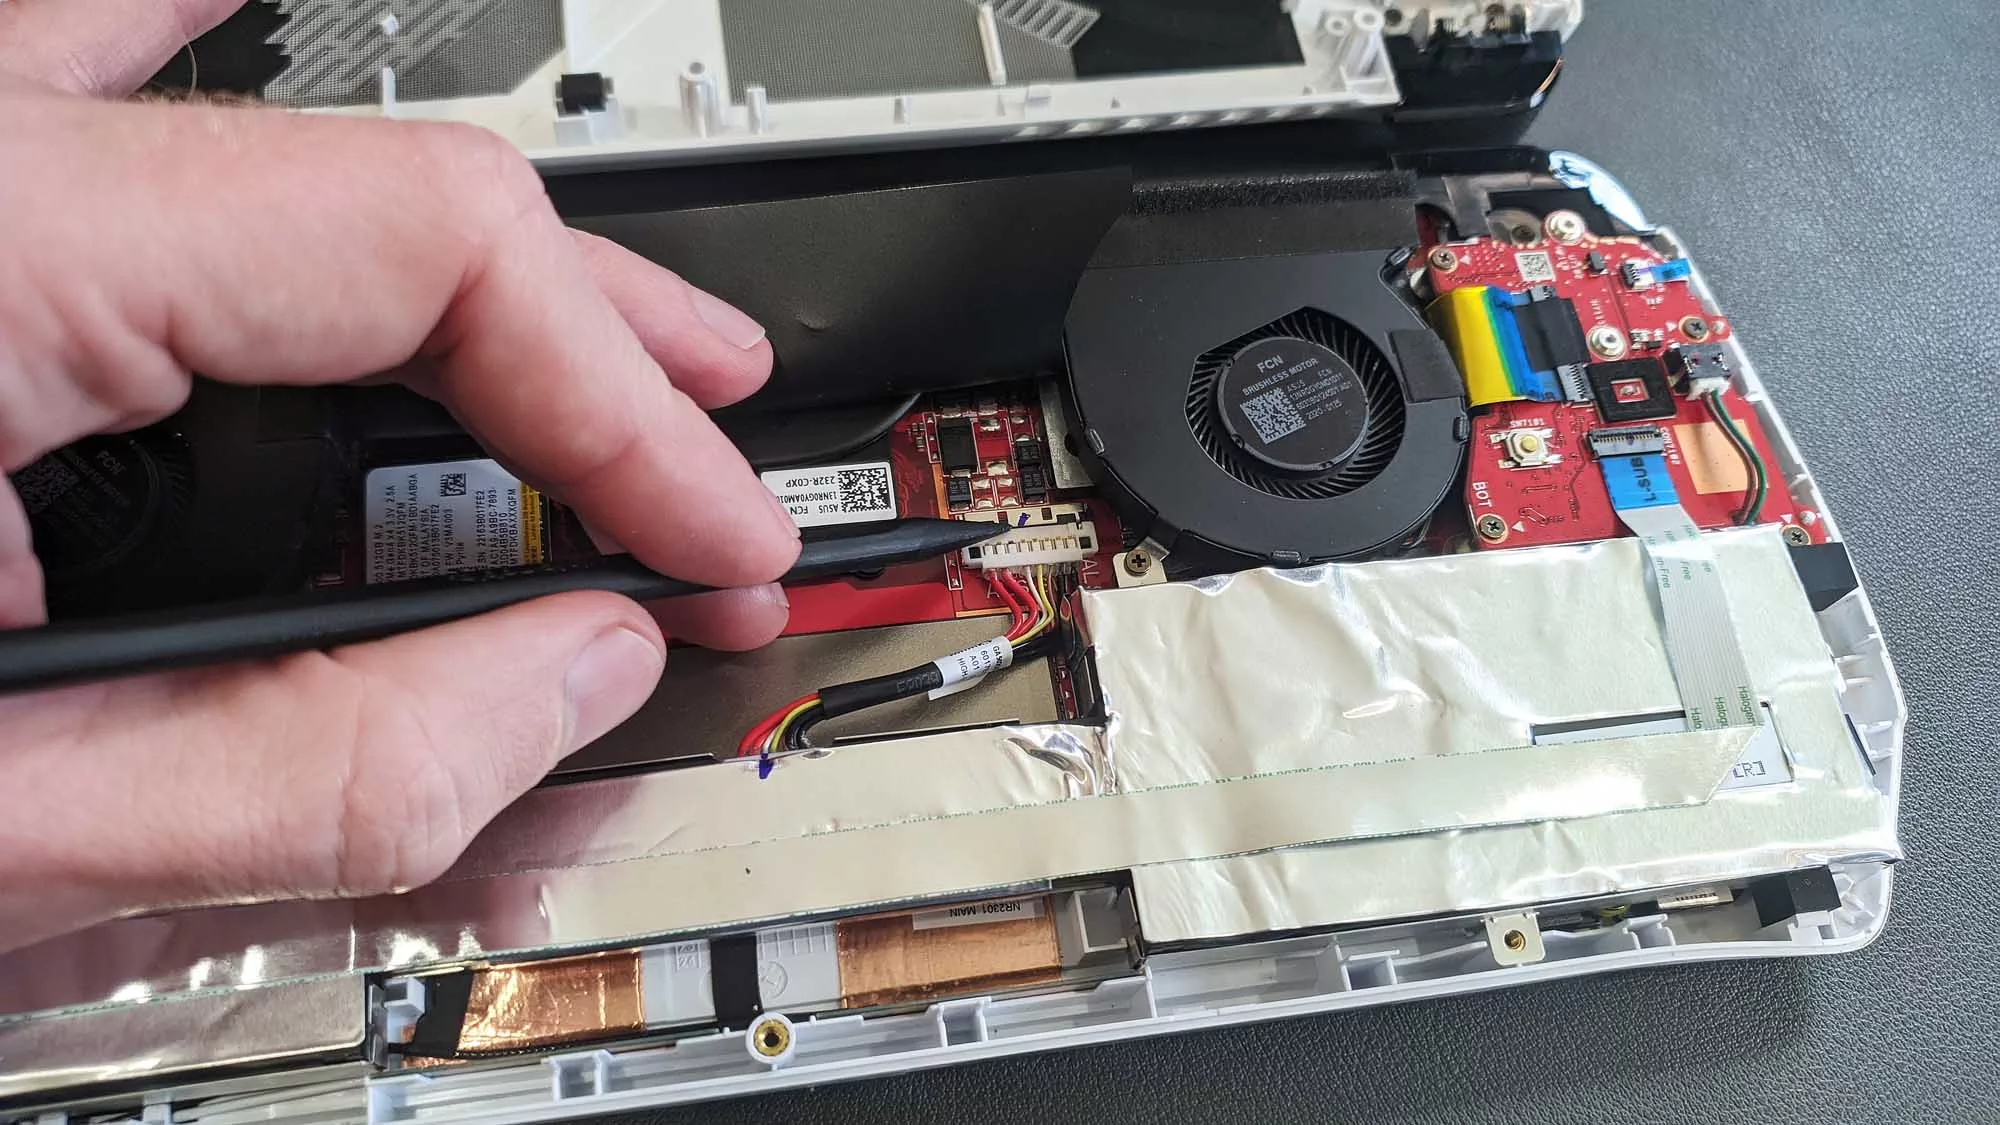 A hand using a spudger to undo the battery retaining clip inside the ROG Ally.